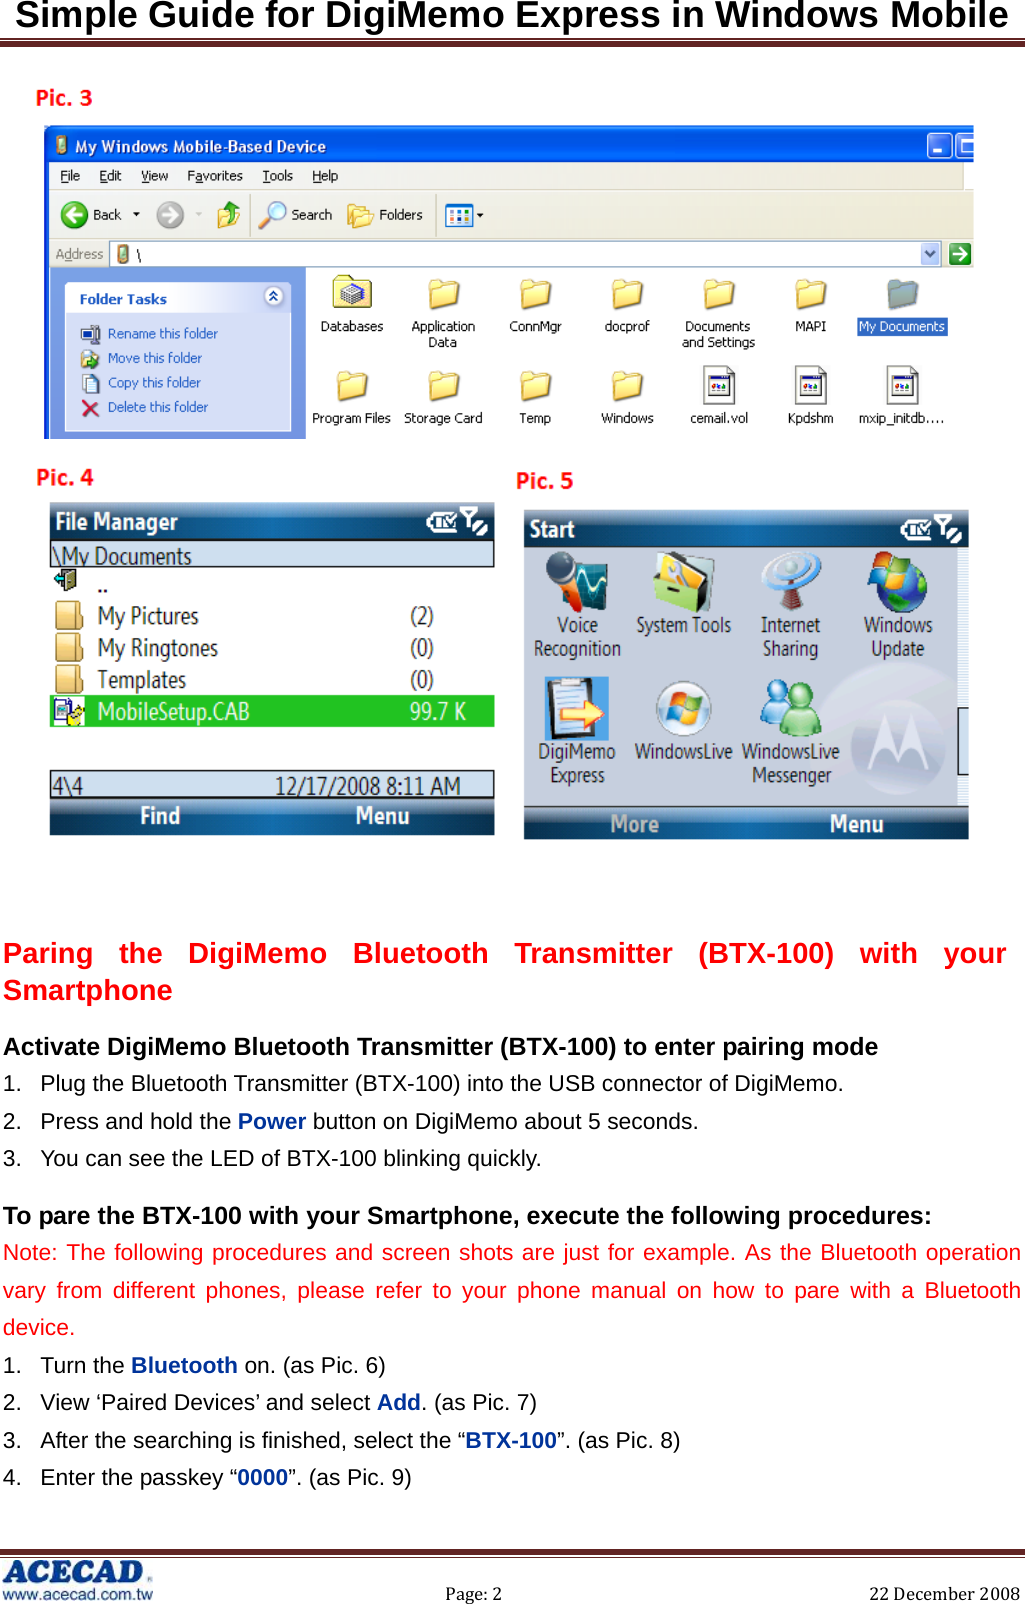 Simple Guide for DigiMemo Express in Windows Mobile  Page:2 22December2008    Paring the DigiMemo Bluetooth Transmitter (BTX-100) with your Smartphone Activate DigiMemo Bluetooth Transmitter (BTX-100) to enter pairing mode 1.  Plug the Bluetooth Transmitter (BTX-100) into the USB connector of DigiMemo. 2.  Press and hold the Power button on DigiMemo about 5 seconds. 3.  You can see the LED of BTX-100 blinking quickly. To pare the BTX-100 with your Smartphone, execute the following procedures: Note: The following procedures and screen shots are just for example. As the Bluetooth operation vary from different phones, please refer to your phone manual on how to pare with a Bluetooth device. 1. Turn the Bluetooth on. (as Pic. 6) 2.  View ‘Paired Devices’ and select Add. (as Pic. 7) 3.  After the searching is finished, select the “BTX-100”. (as Pic. 8) 4.  Enter the passkey “0000”. (as Pic. 9) 